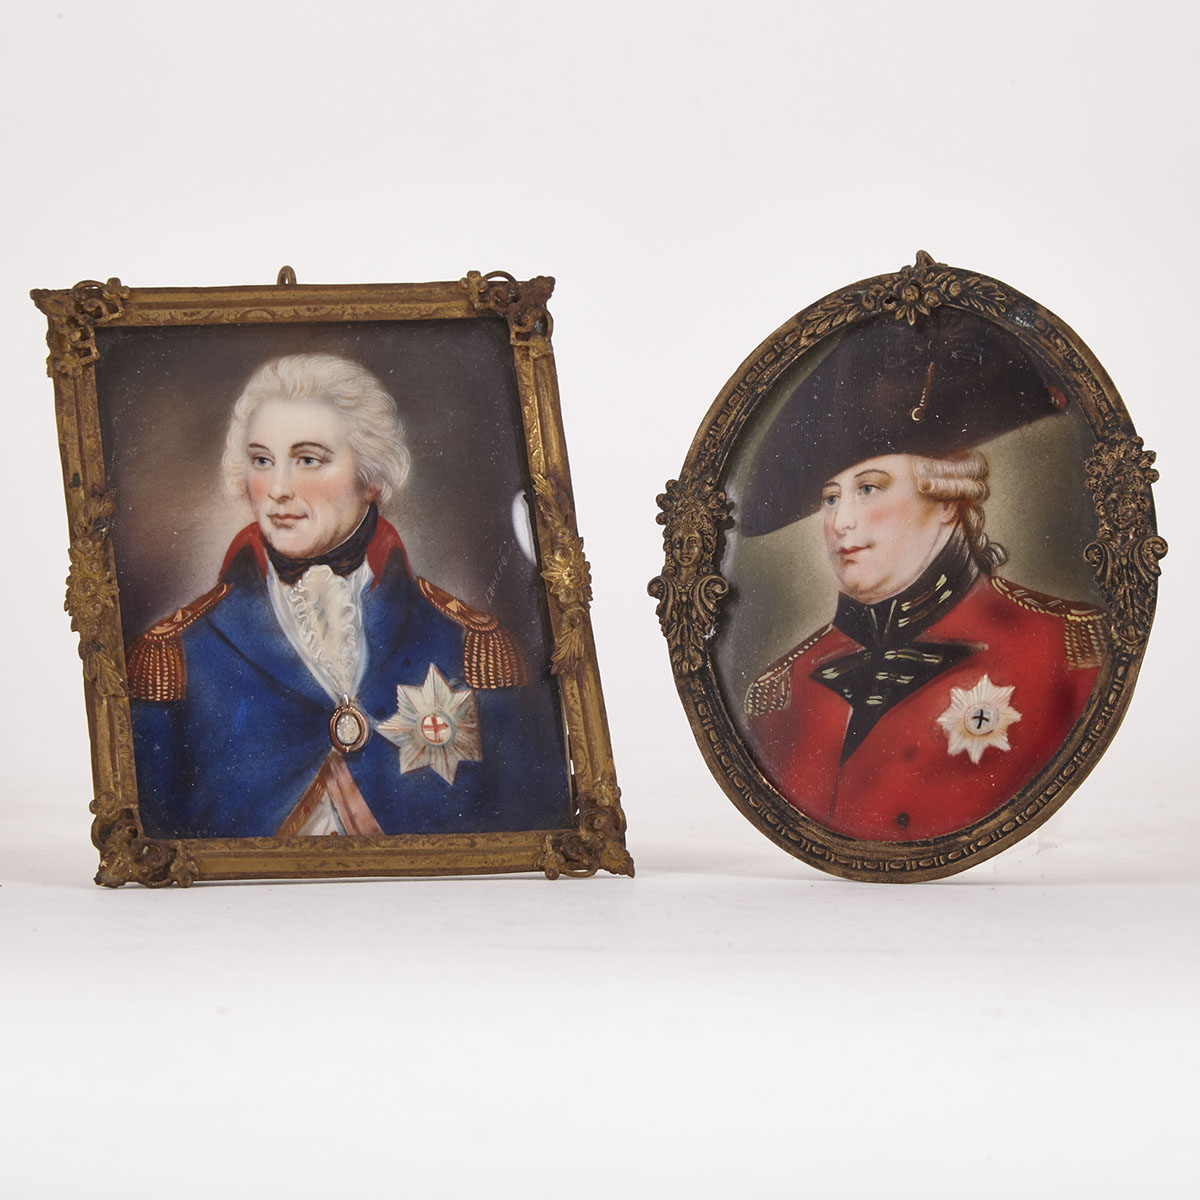 Two British School Portrait Miniatures: George III, after Sir William Beechy and Admiral Lord Nelson, after Lemuel Francis Abbott, early 19th century